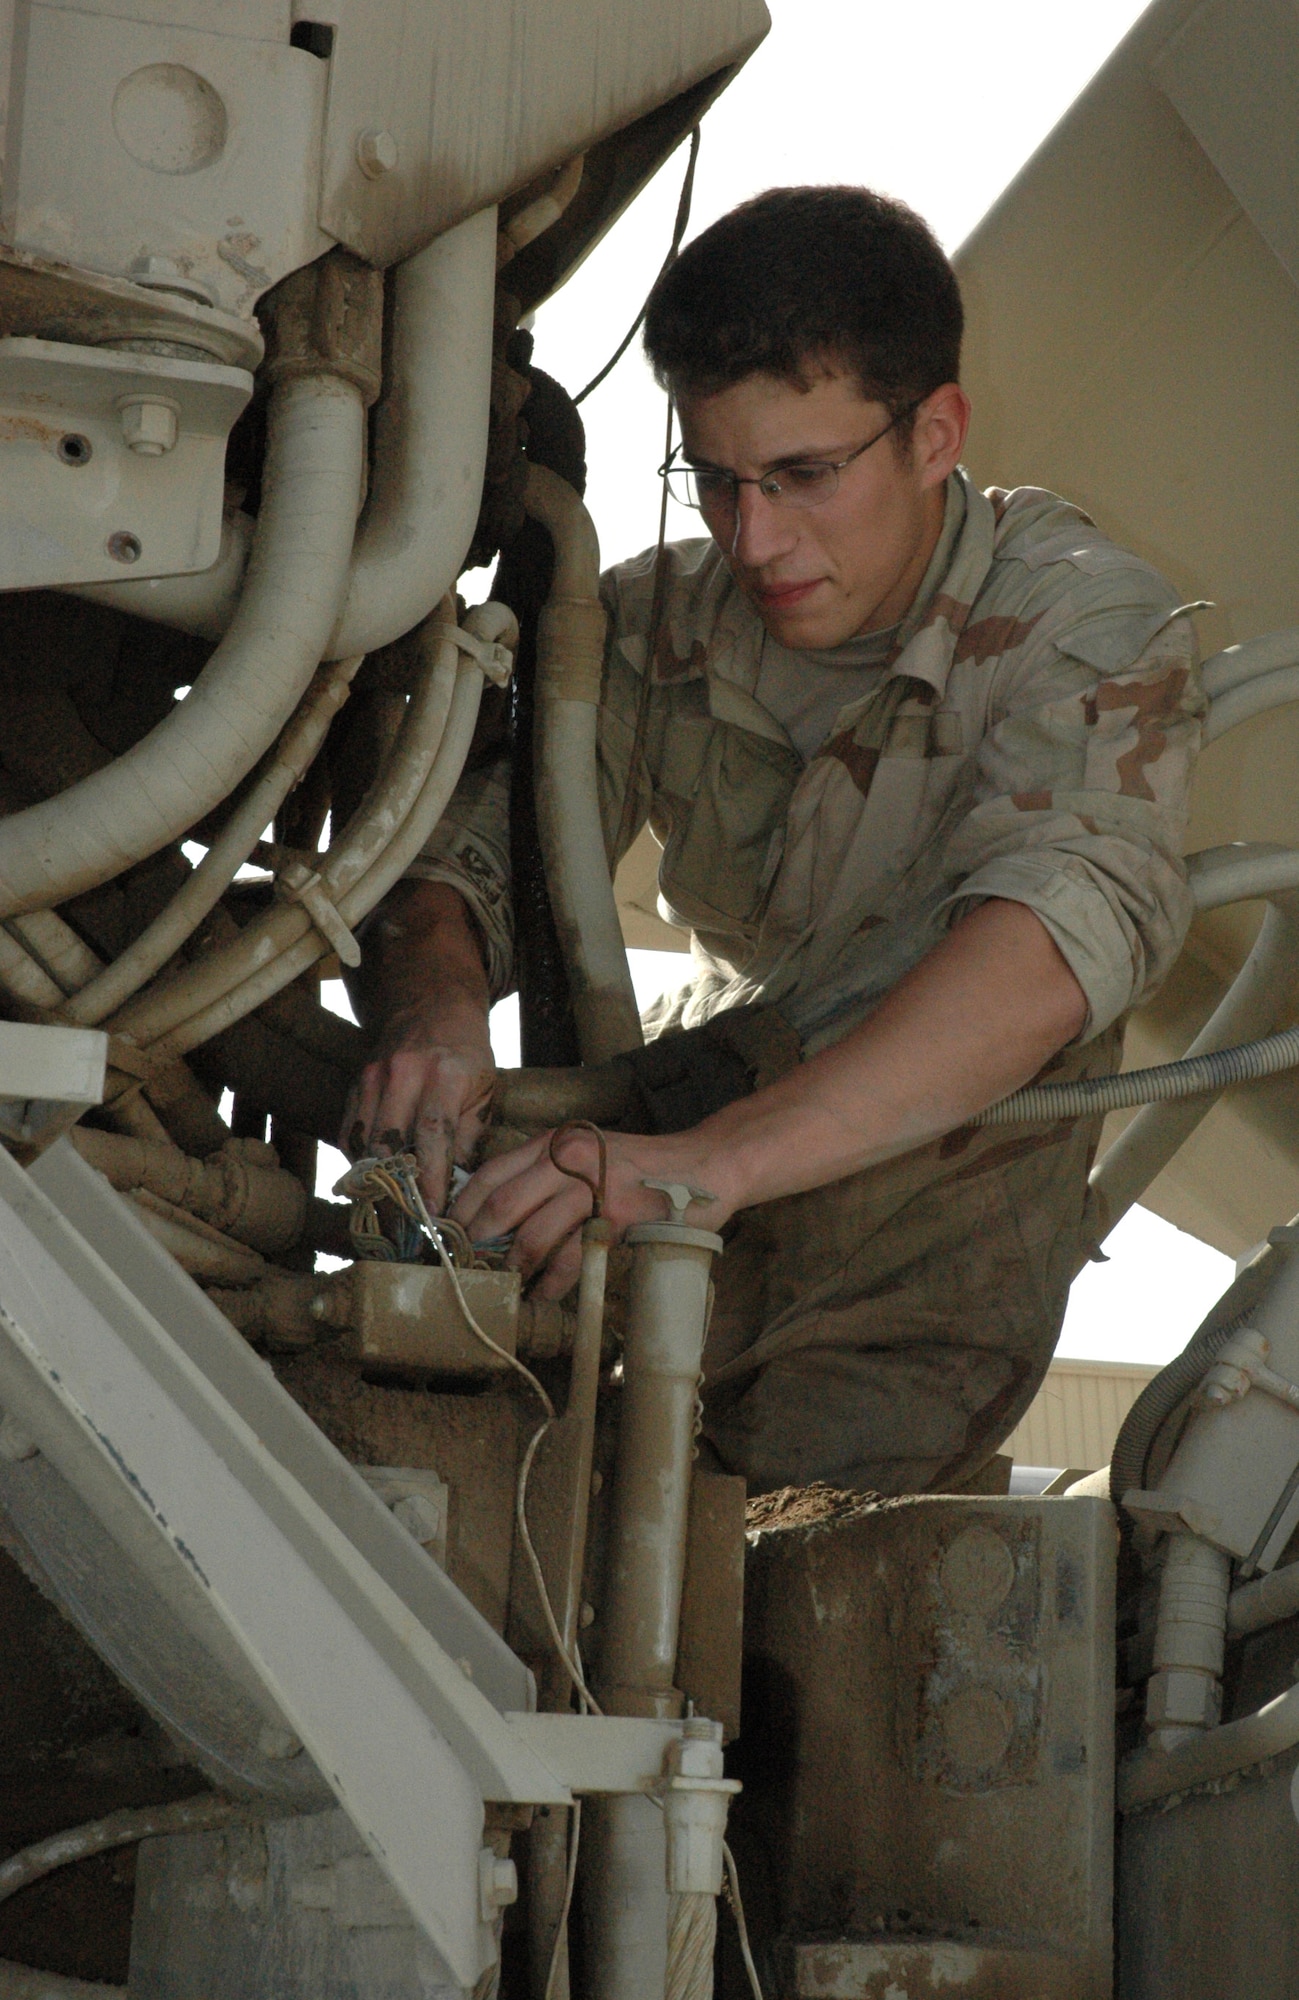 Senior Airman Nic Skirpan inspects engine components and hydraulic fittings on a 20-ton rock dump Feb. 19 in Southwest Asia. RED HORSE vehicles from all over the area of responsibility are sent back to the 379th Air Expeditionary Wing here for maintenance and repair work. Airman Skirpan is a 1st Expeditionary Red Horse Group vehicle maintenance journeyman. (U.S. Air Force photo/Senior Airman Erik Hofmeyer)
